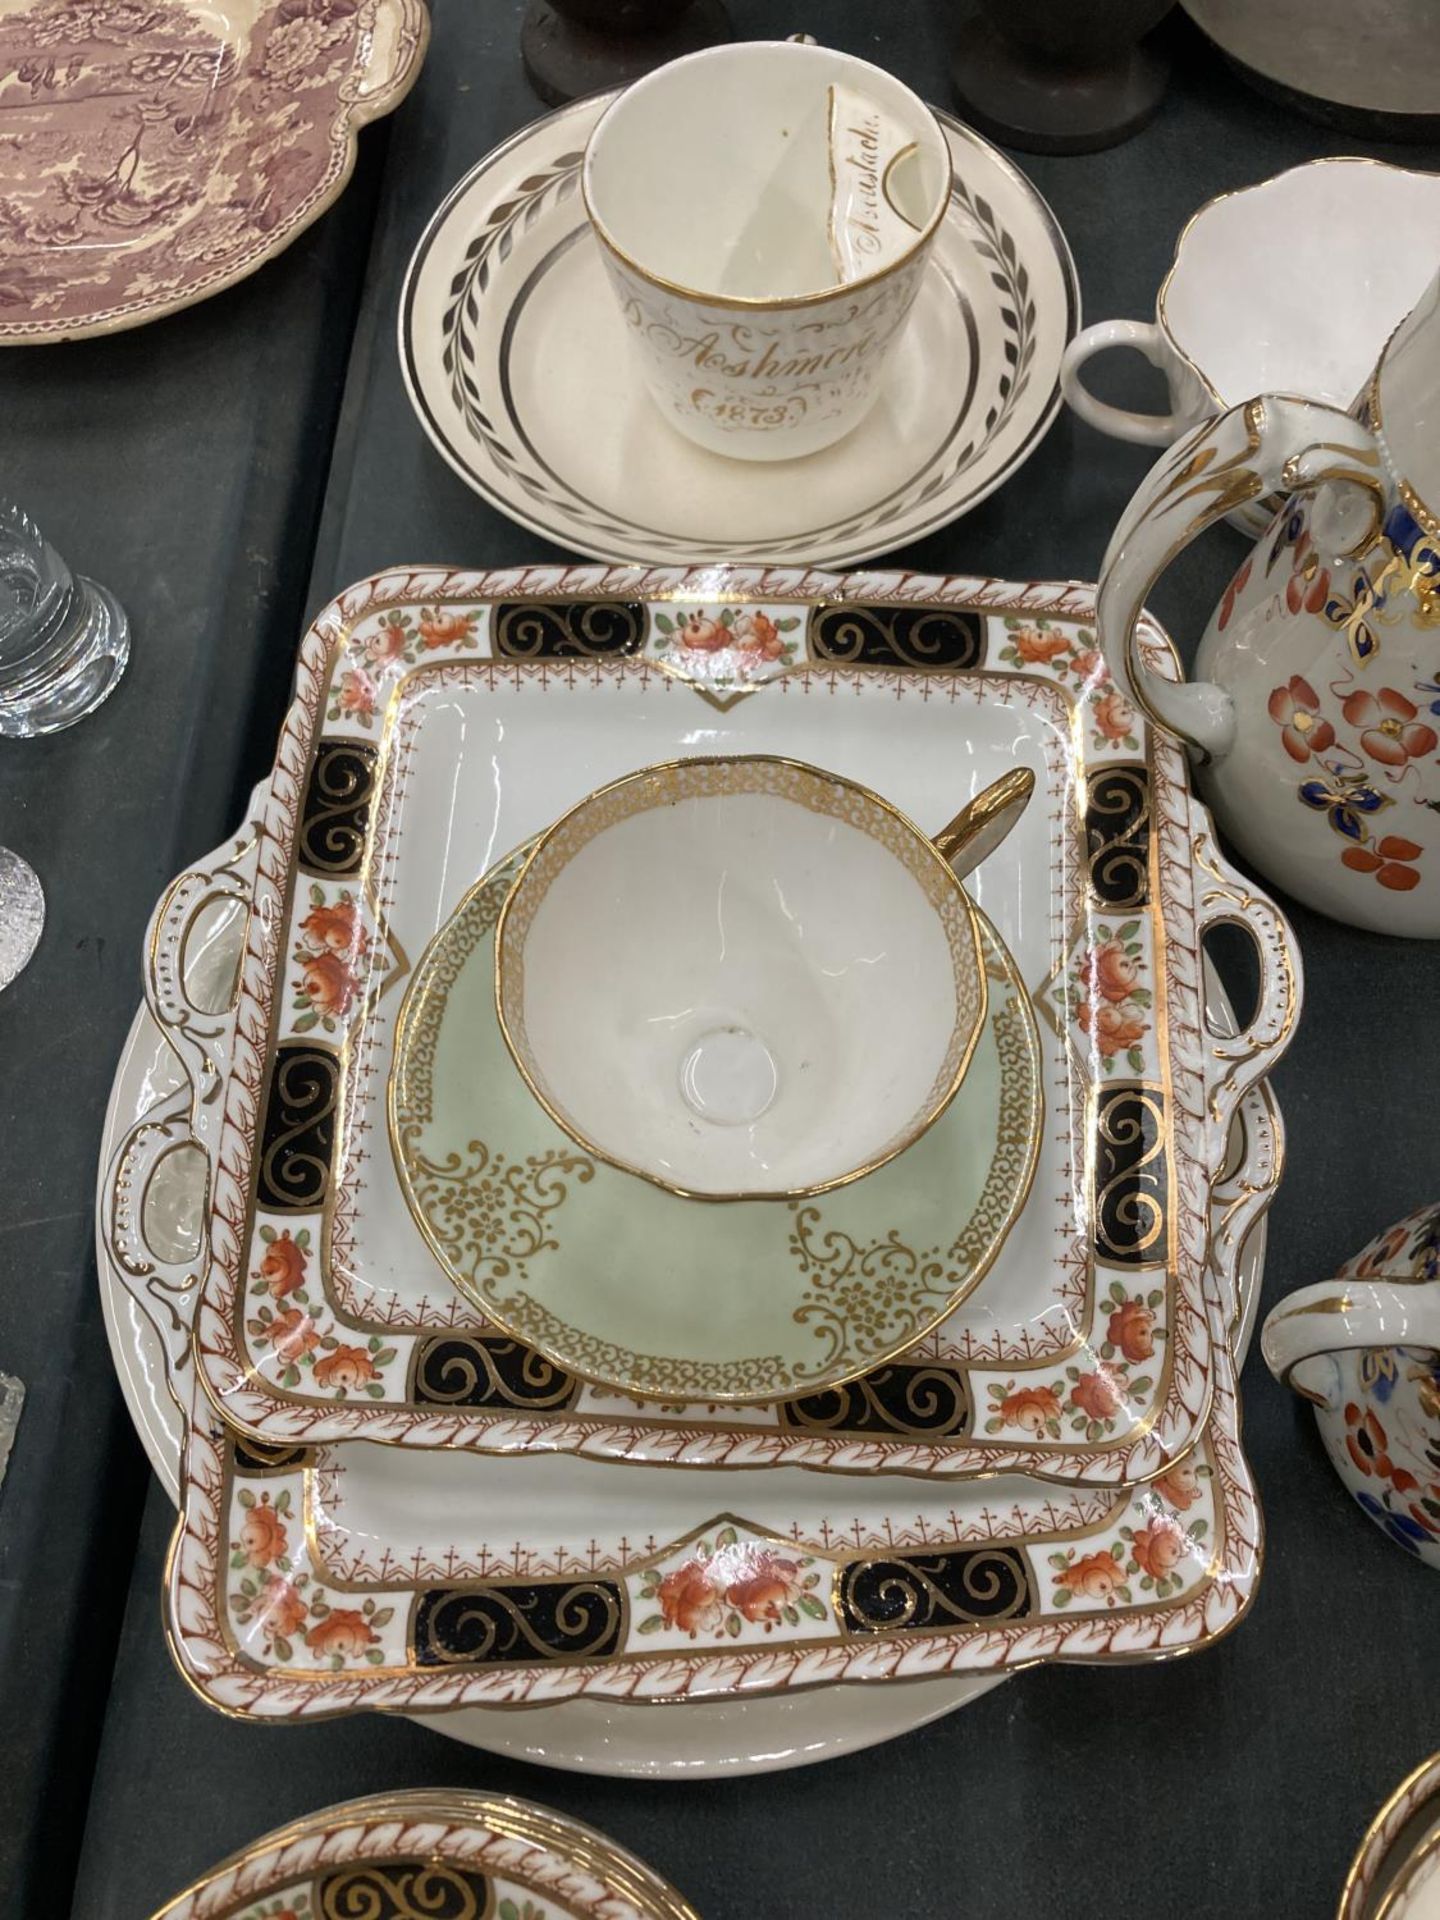 A LARGE QUANTITY OF TEAWARE ITEMS TO INCLUDE SUTHERLAND TO INCLUDE CUPS, SAUCERS, PLATES, CREAM - Image 5 of 5